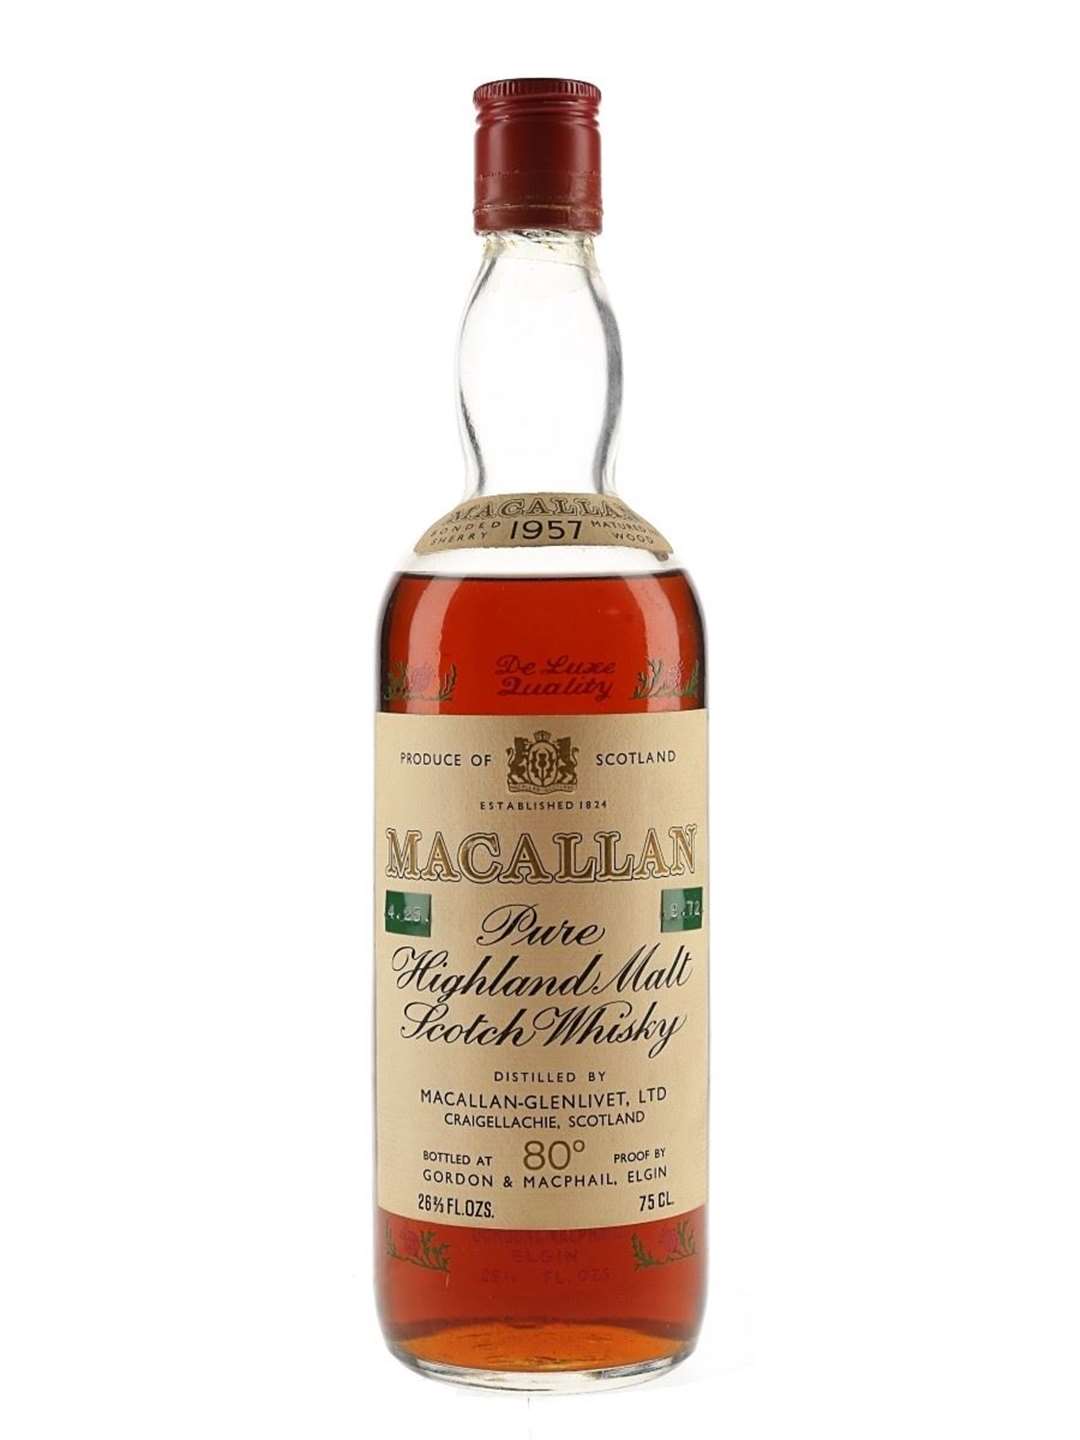 A 1957 Macallan that went for £1,900. Image from whisky.auction